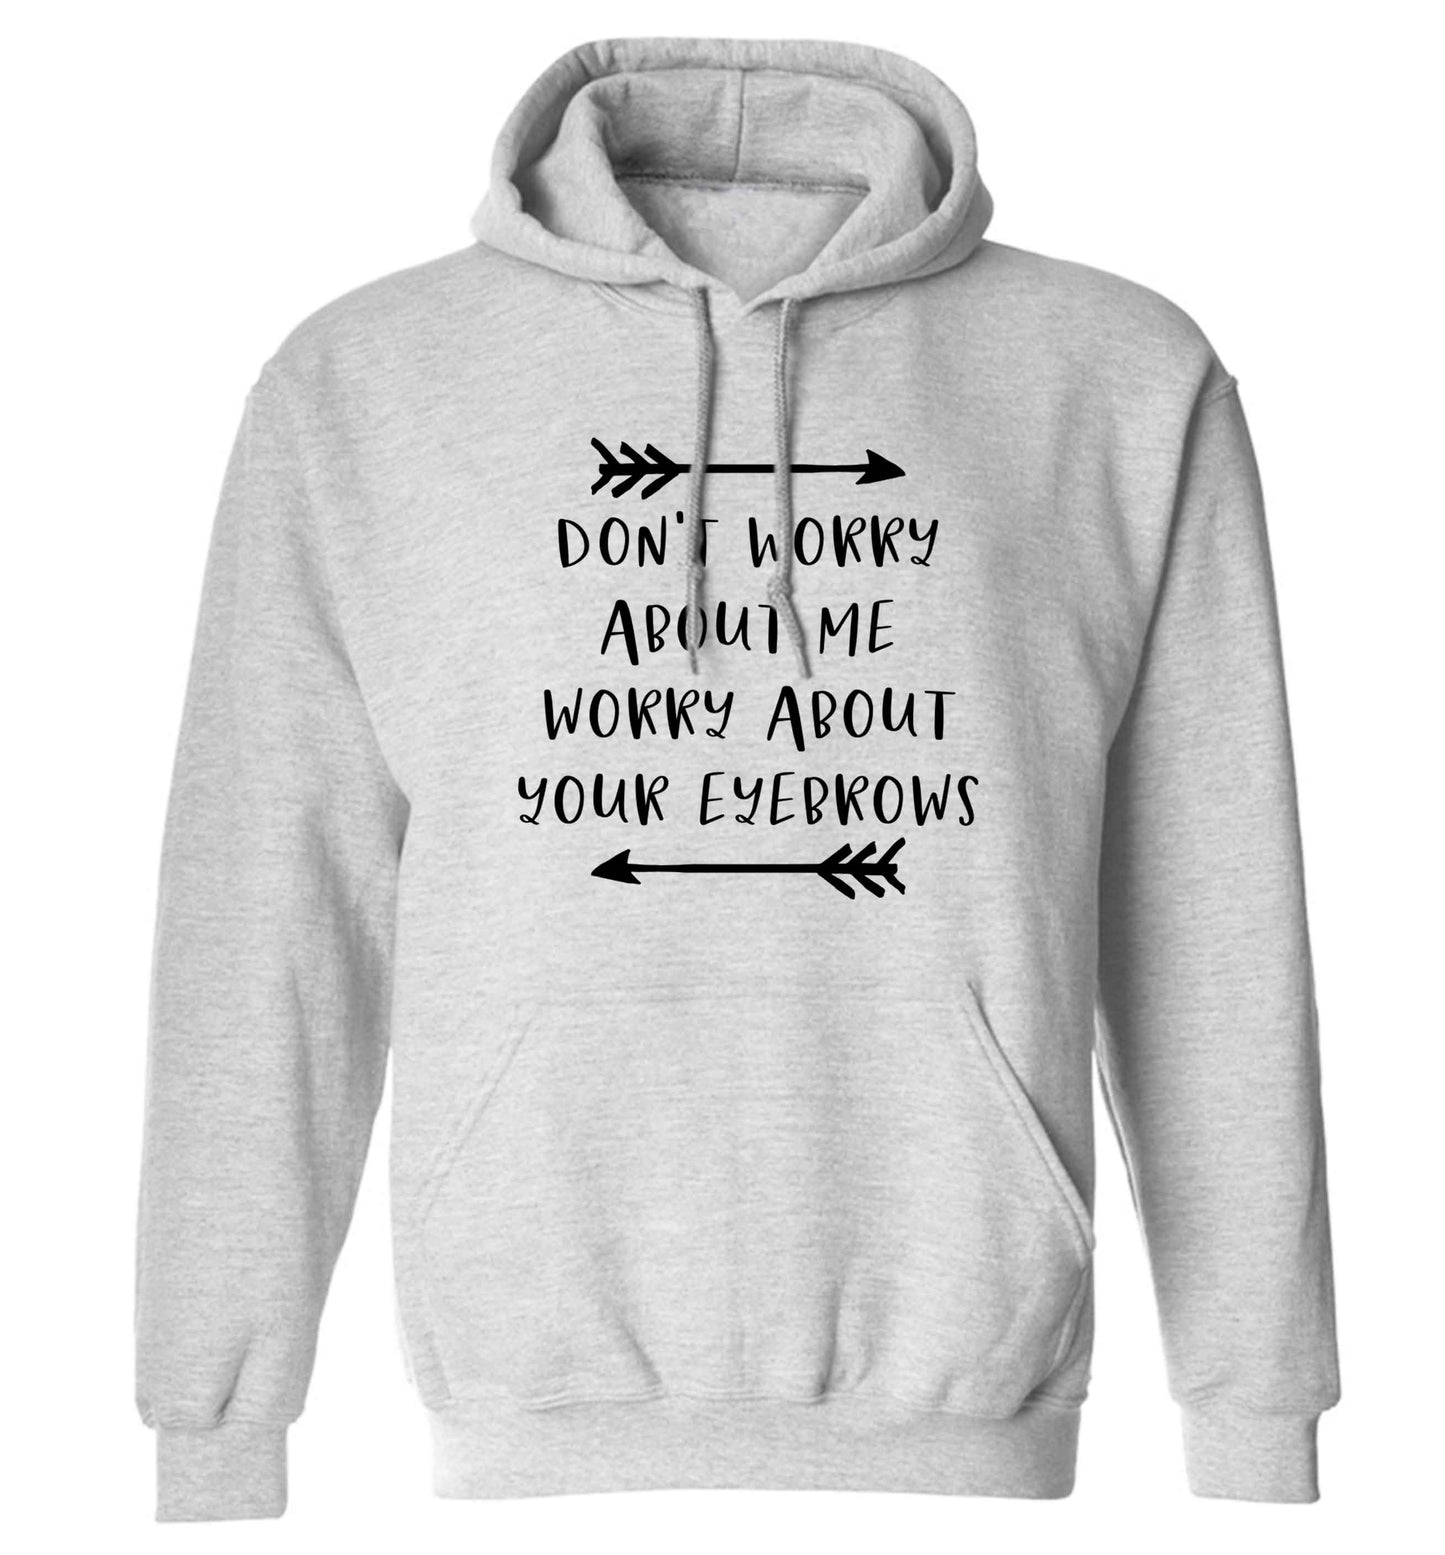 Don't worry about me worry about your eyebrows adults unisex grey hoodie 2XL